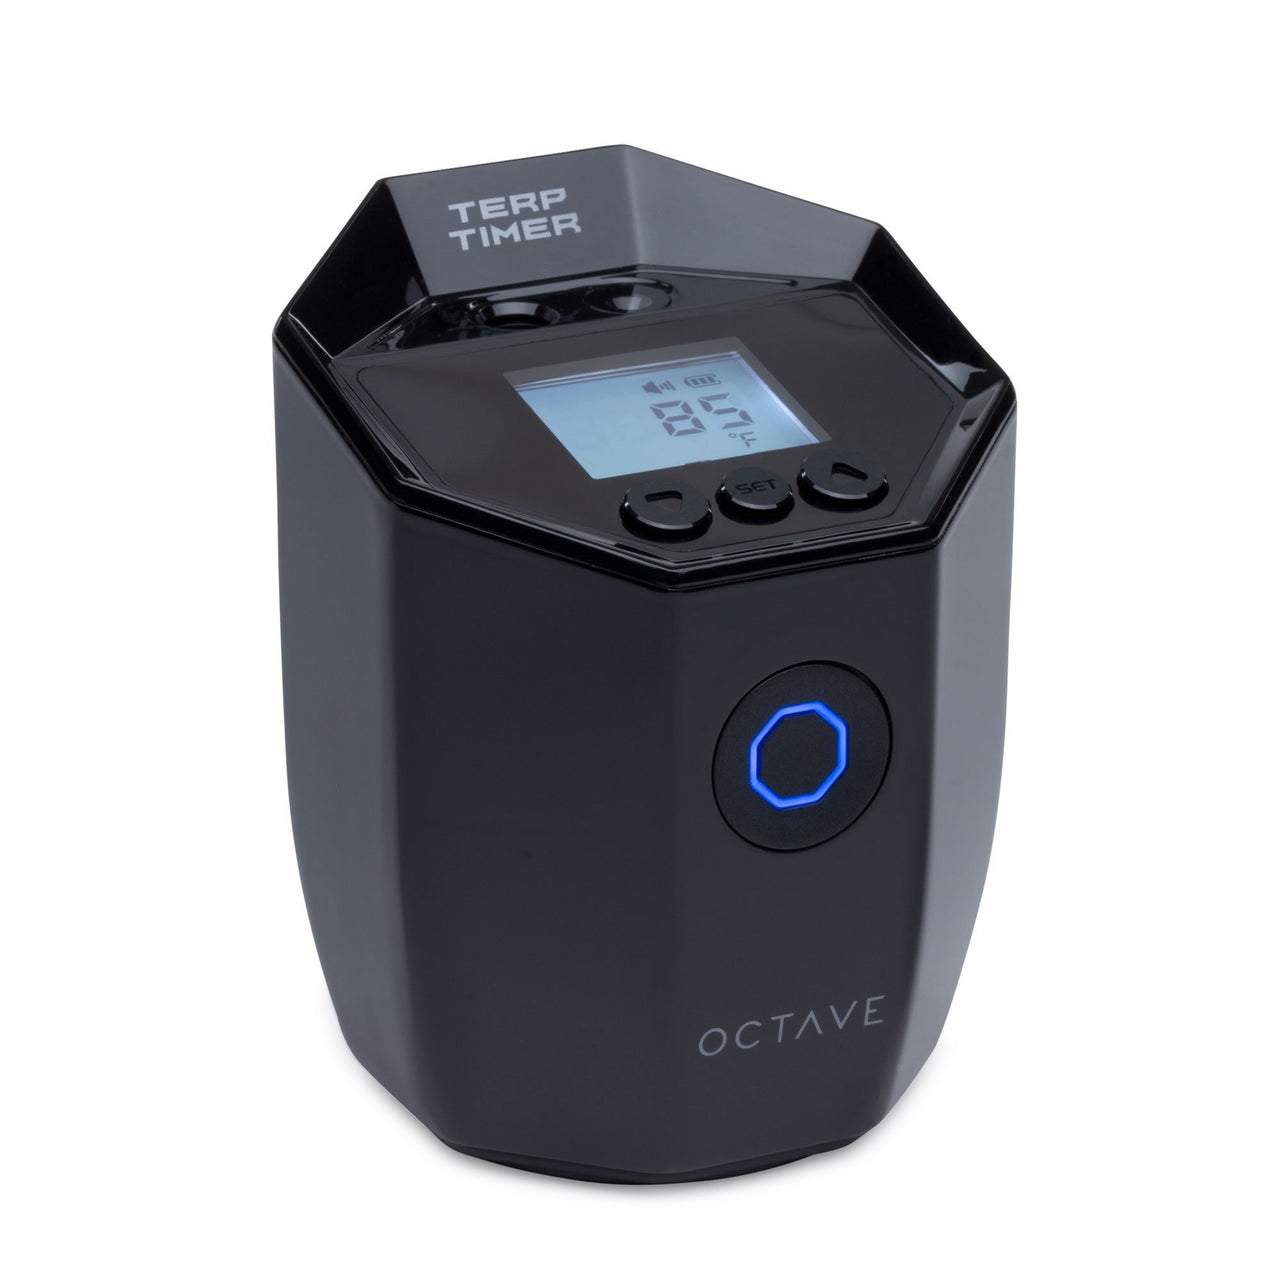 https://cdn.shopify.com/s/files/1/1008/4694/products/octave-terp-timer-dab-accessories-420-science-738719.jpg?v=1621501187&width=1280